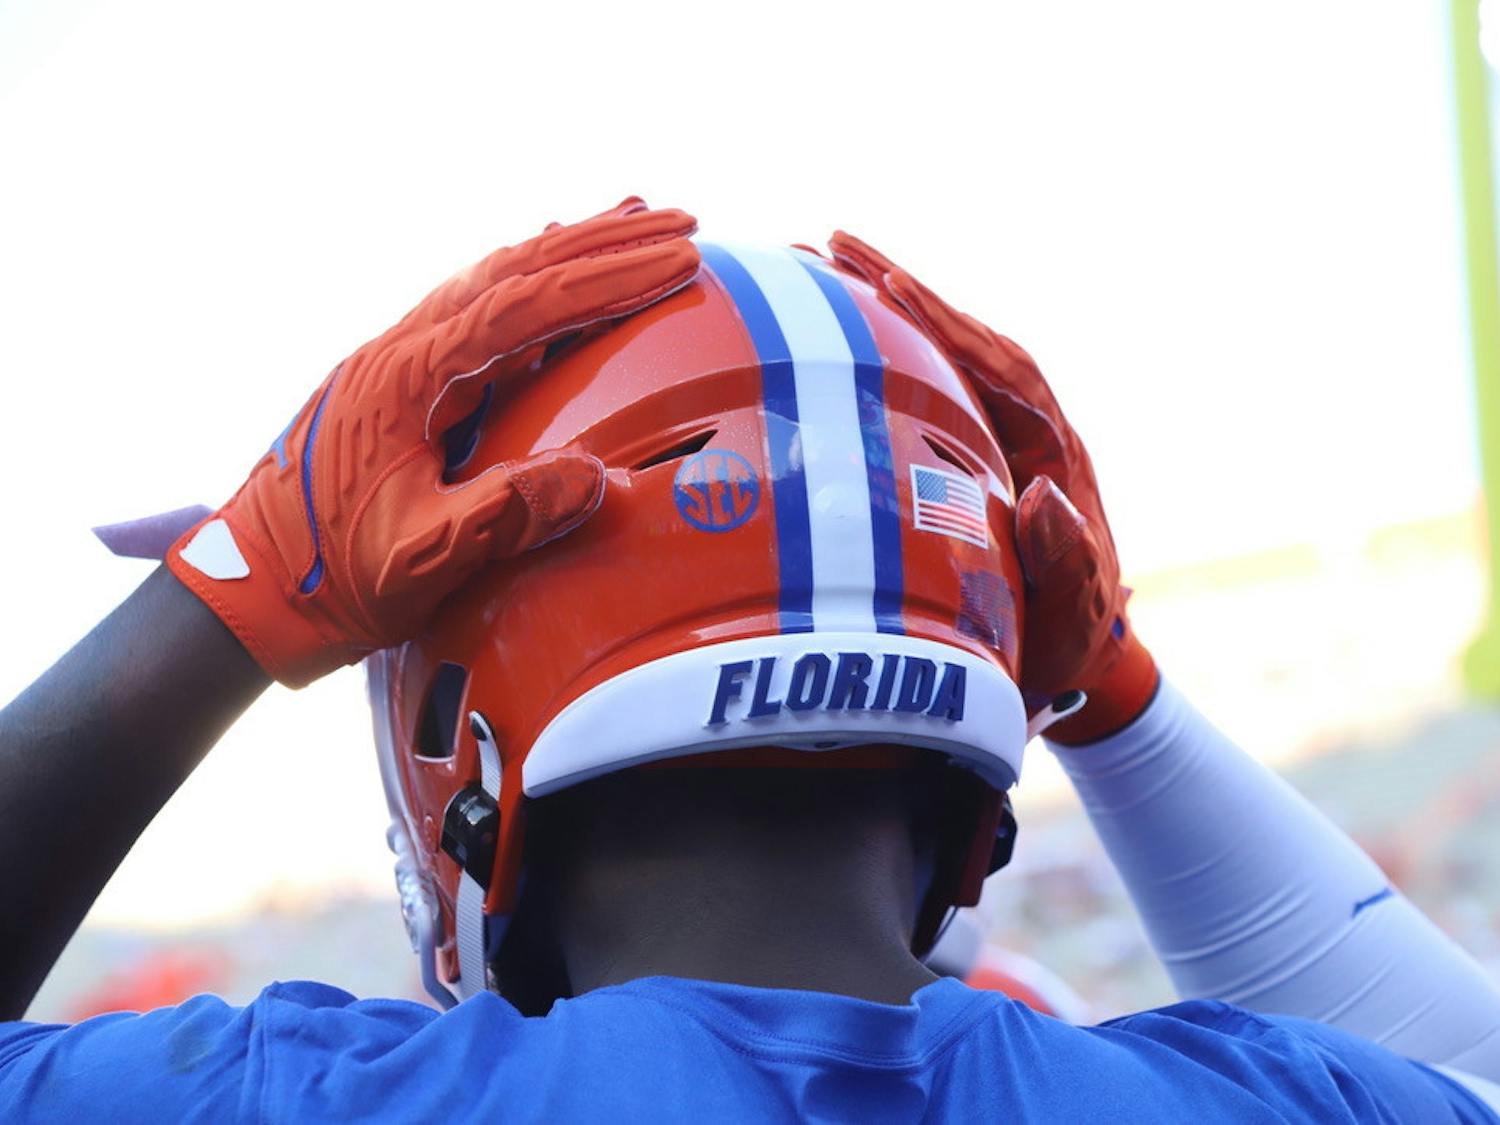 A Florida player touches his helmet during warmups before a game against Florida Atlantic on Sept. 4.